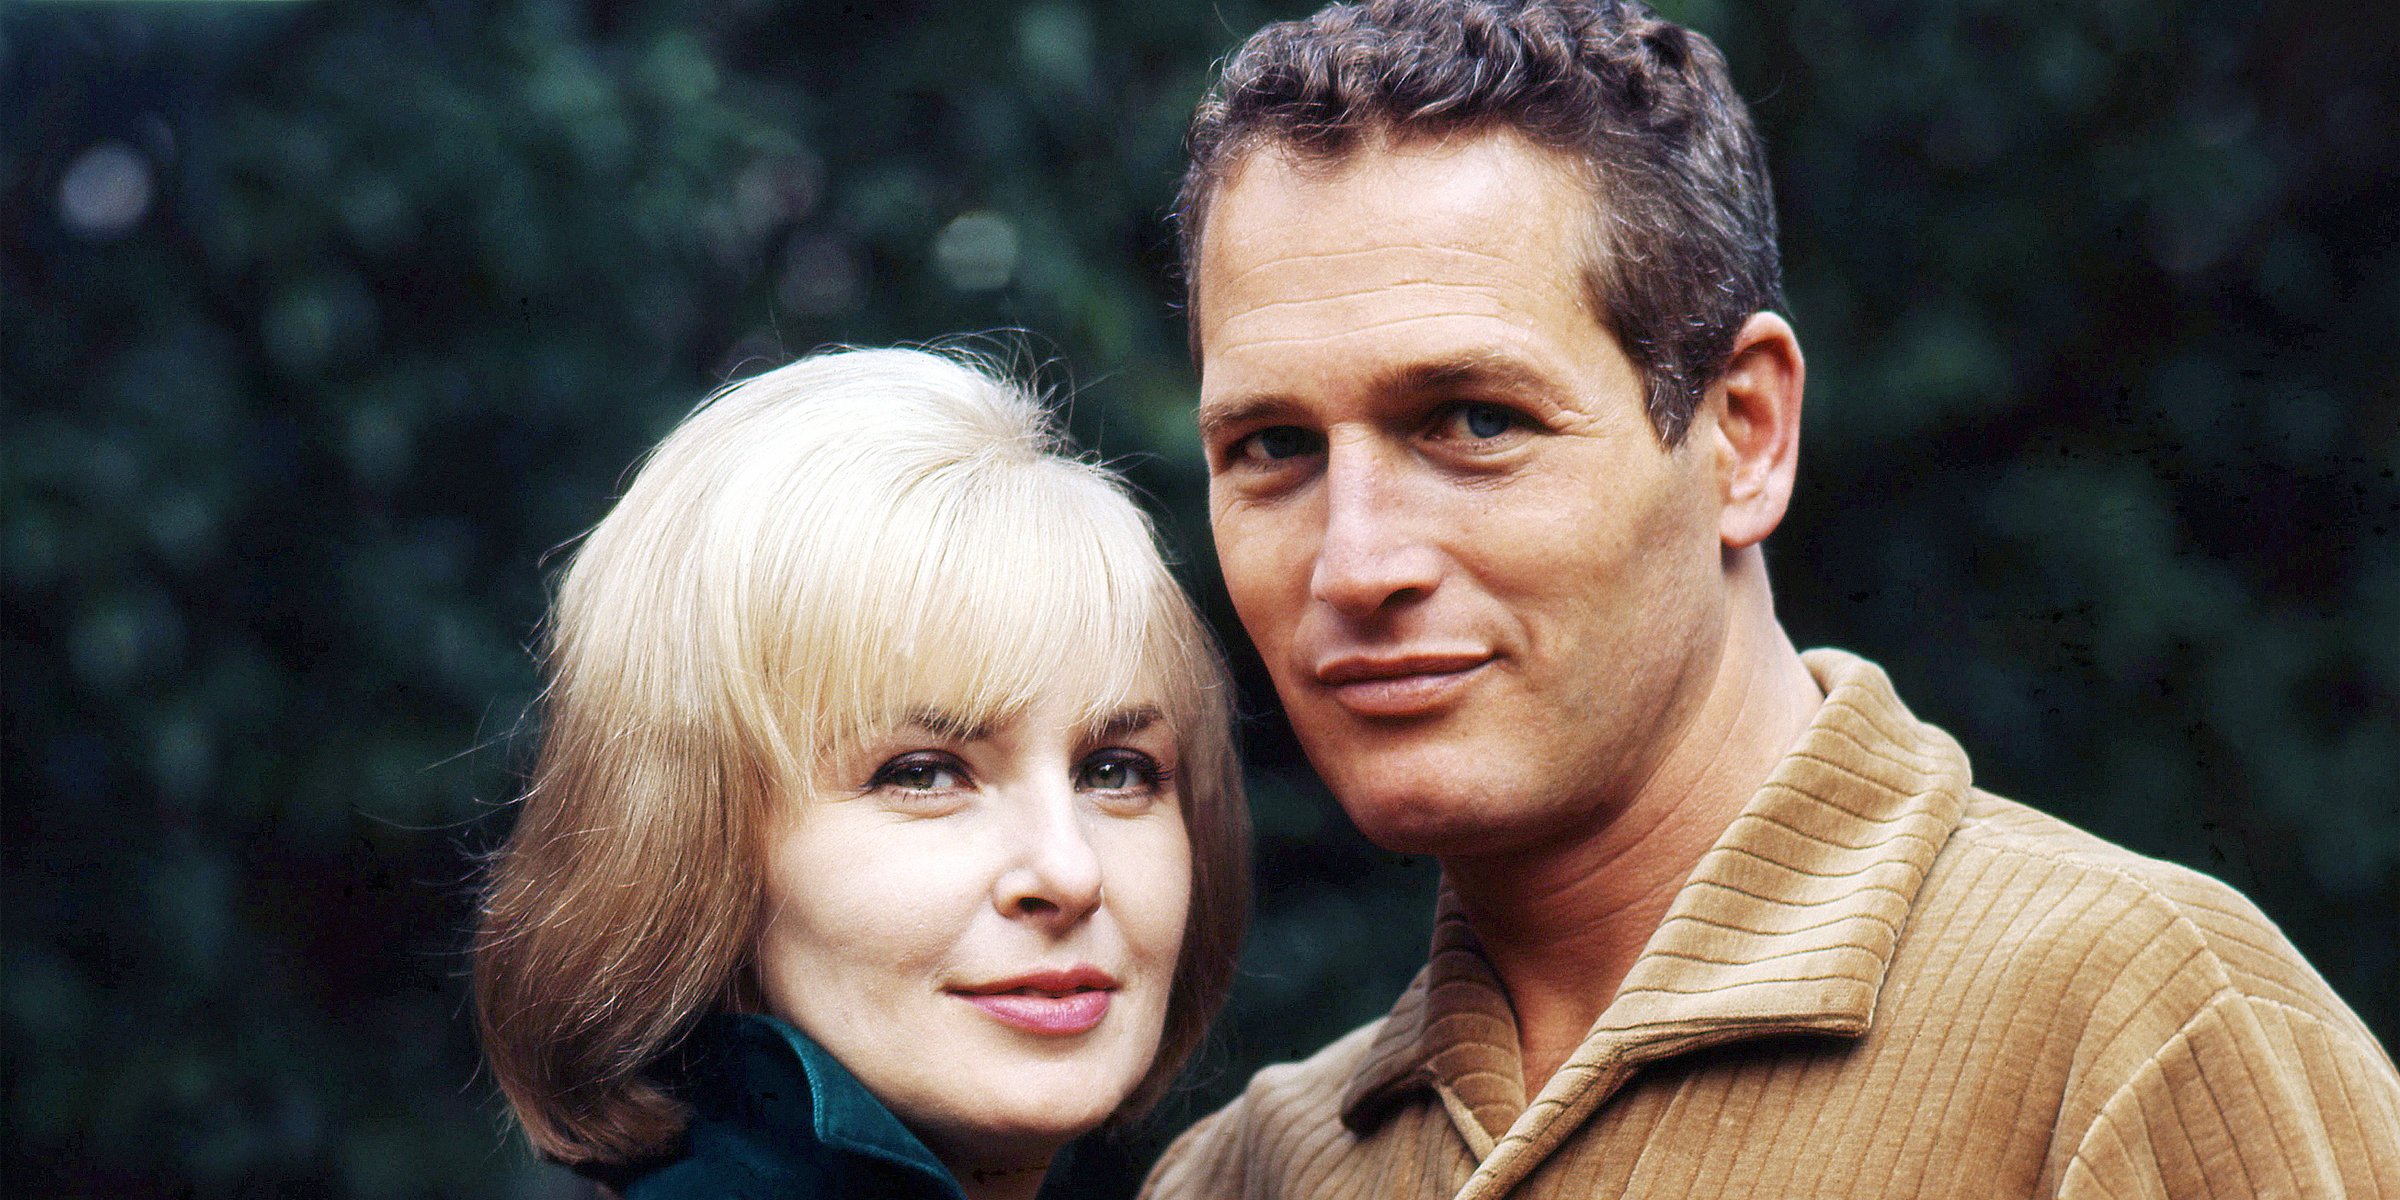 Joanne Woodward and Paul Newman | Source: Getty Images